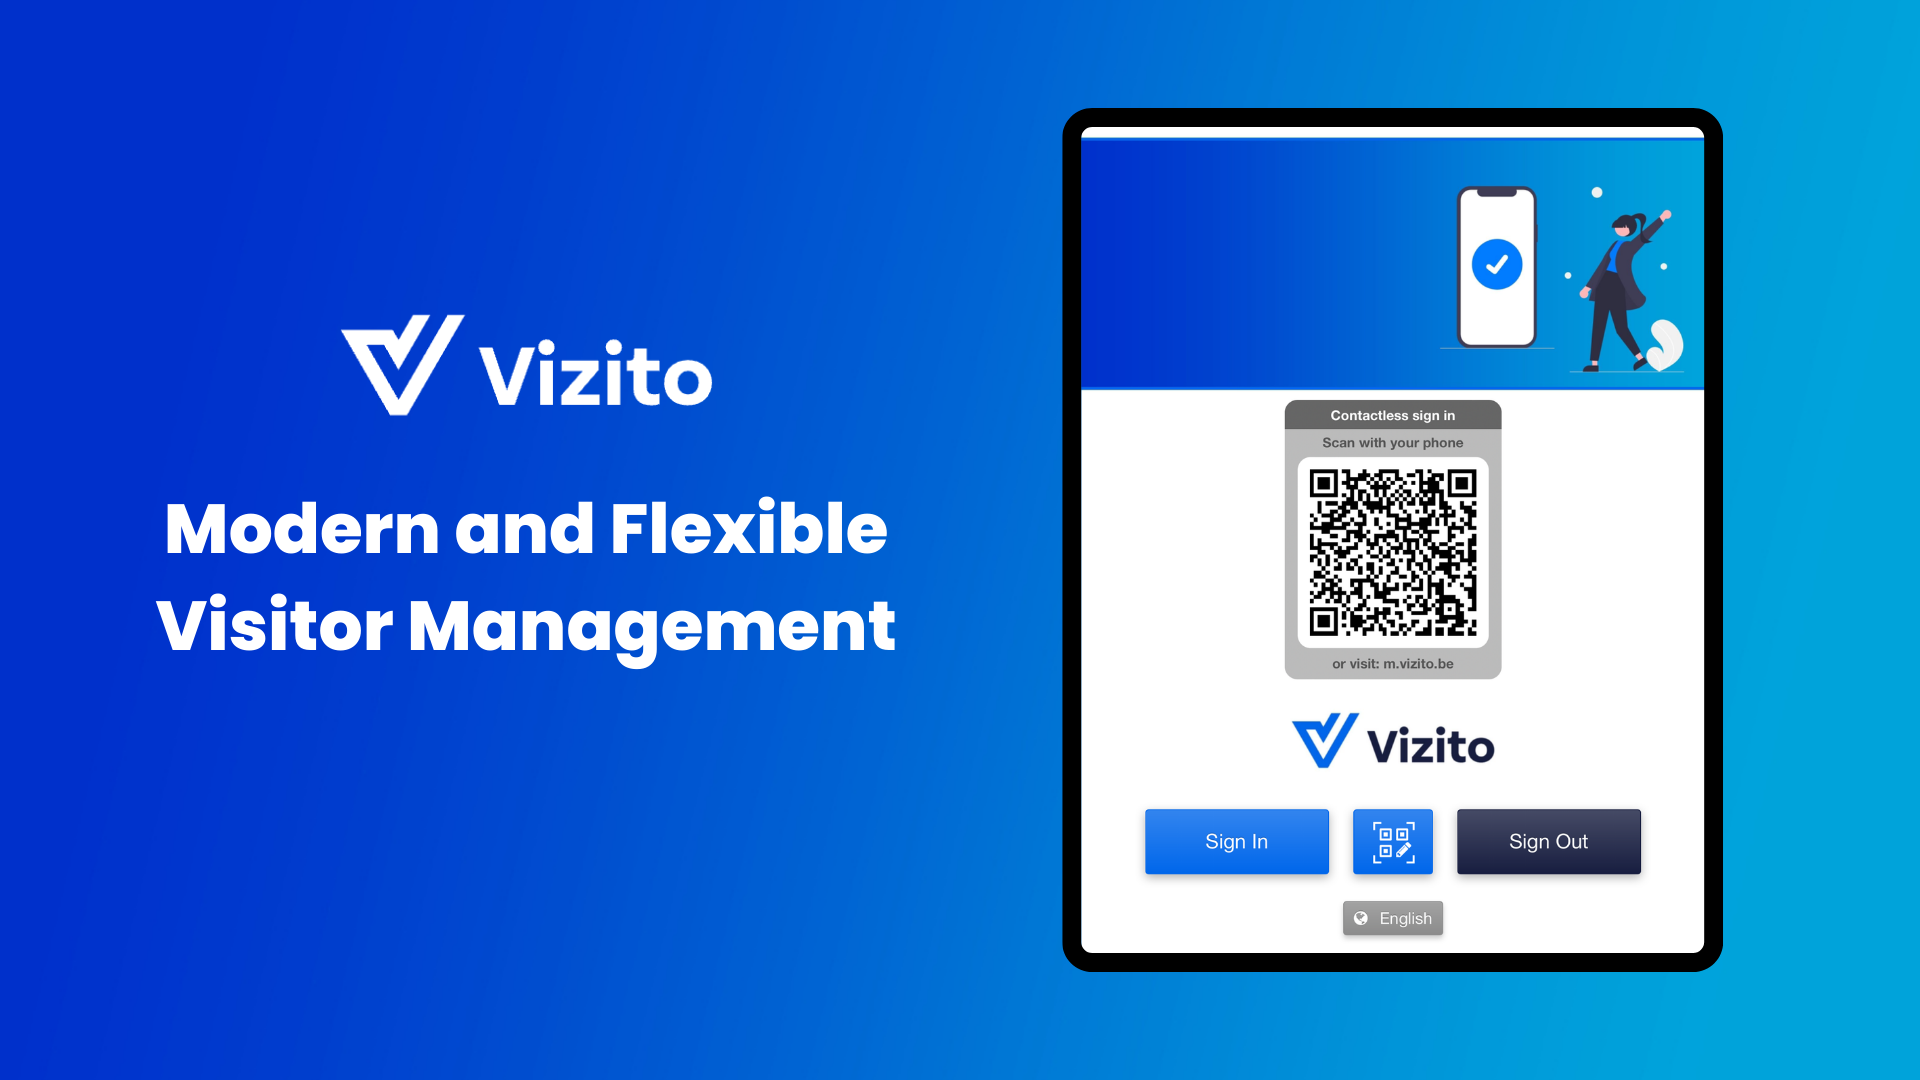 Vizito Visitor Management System 93f4a75c-1a68-41ef-916d-5530587dd024.png